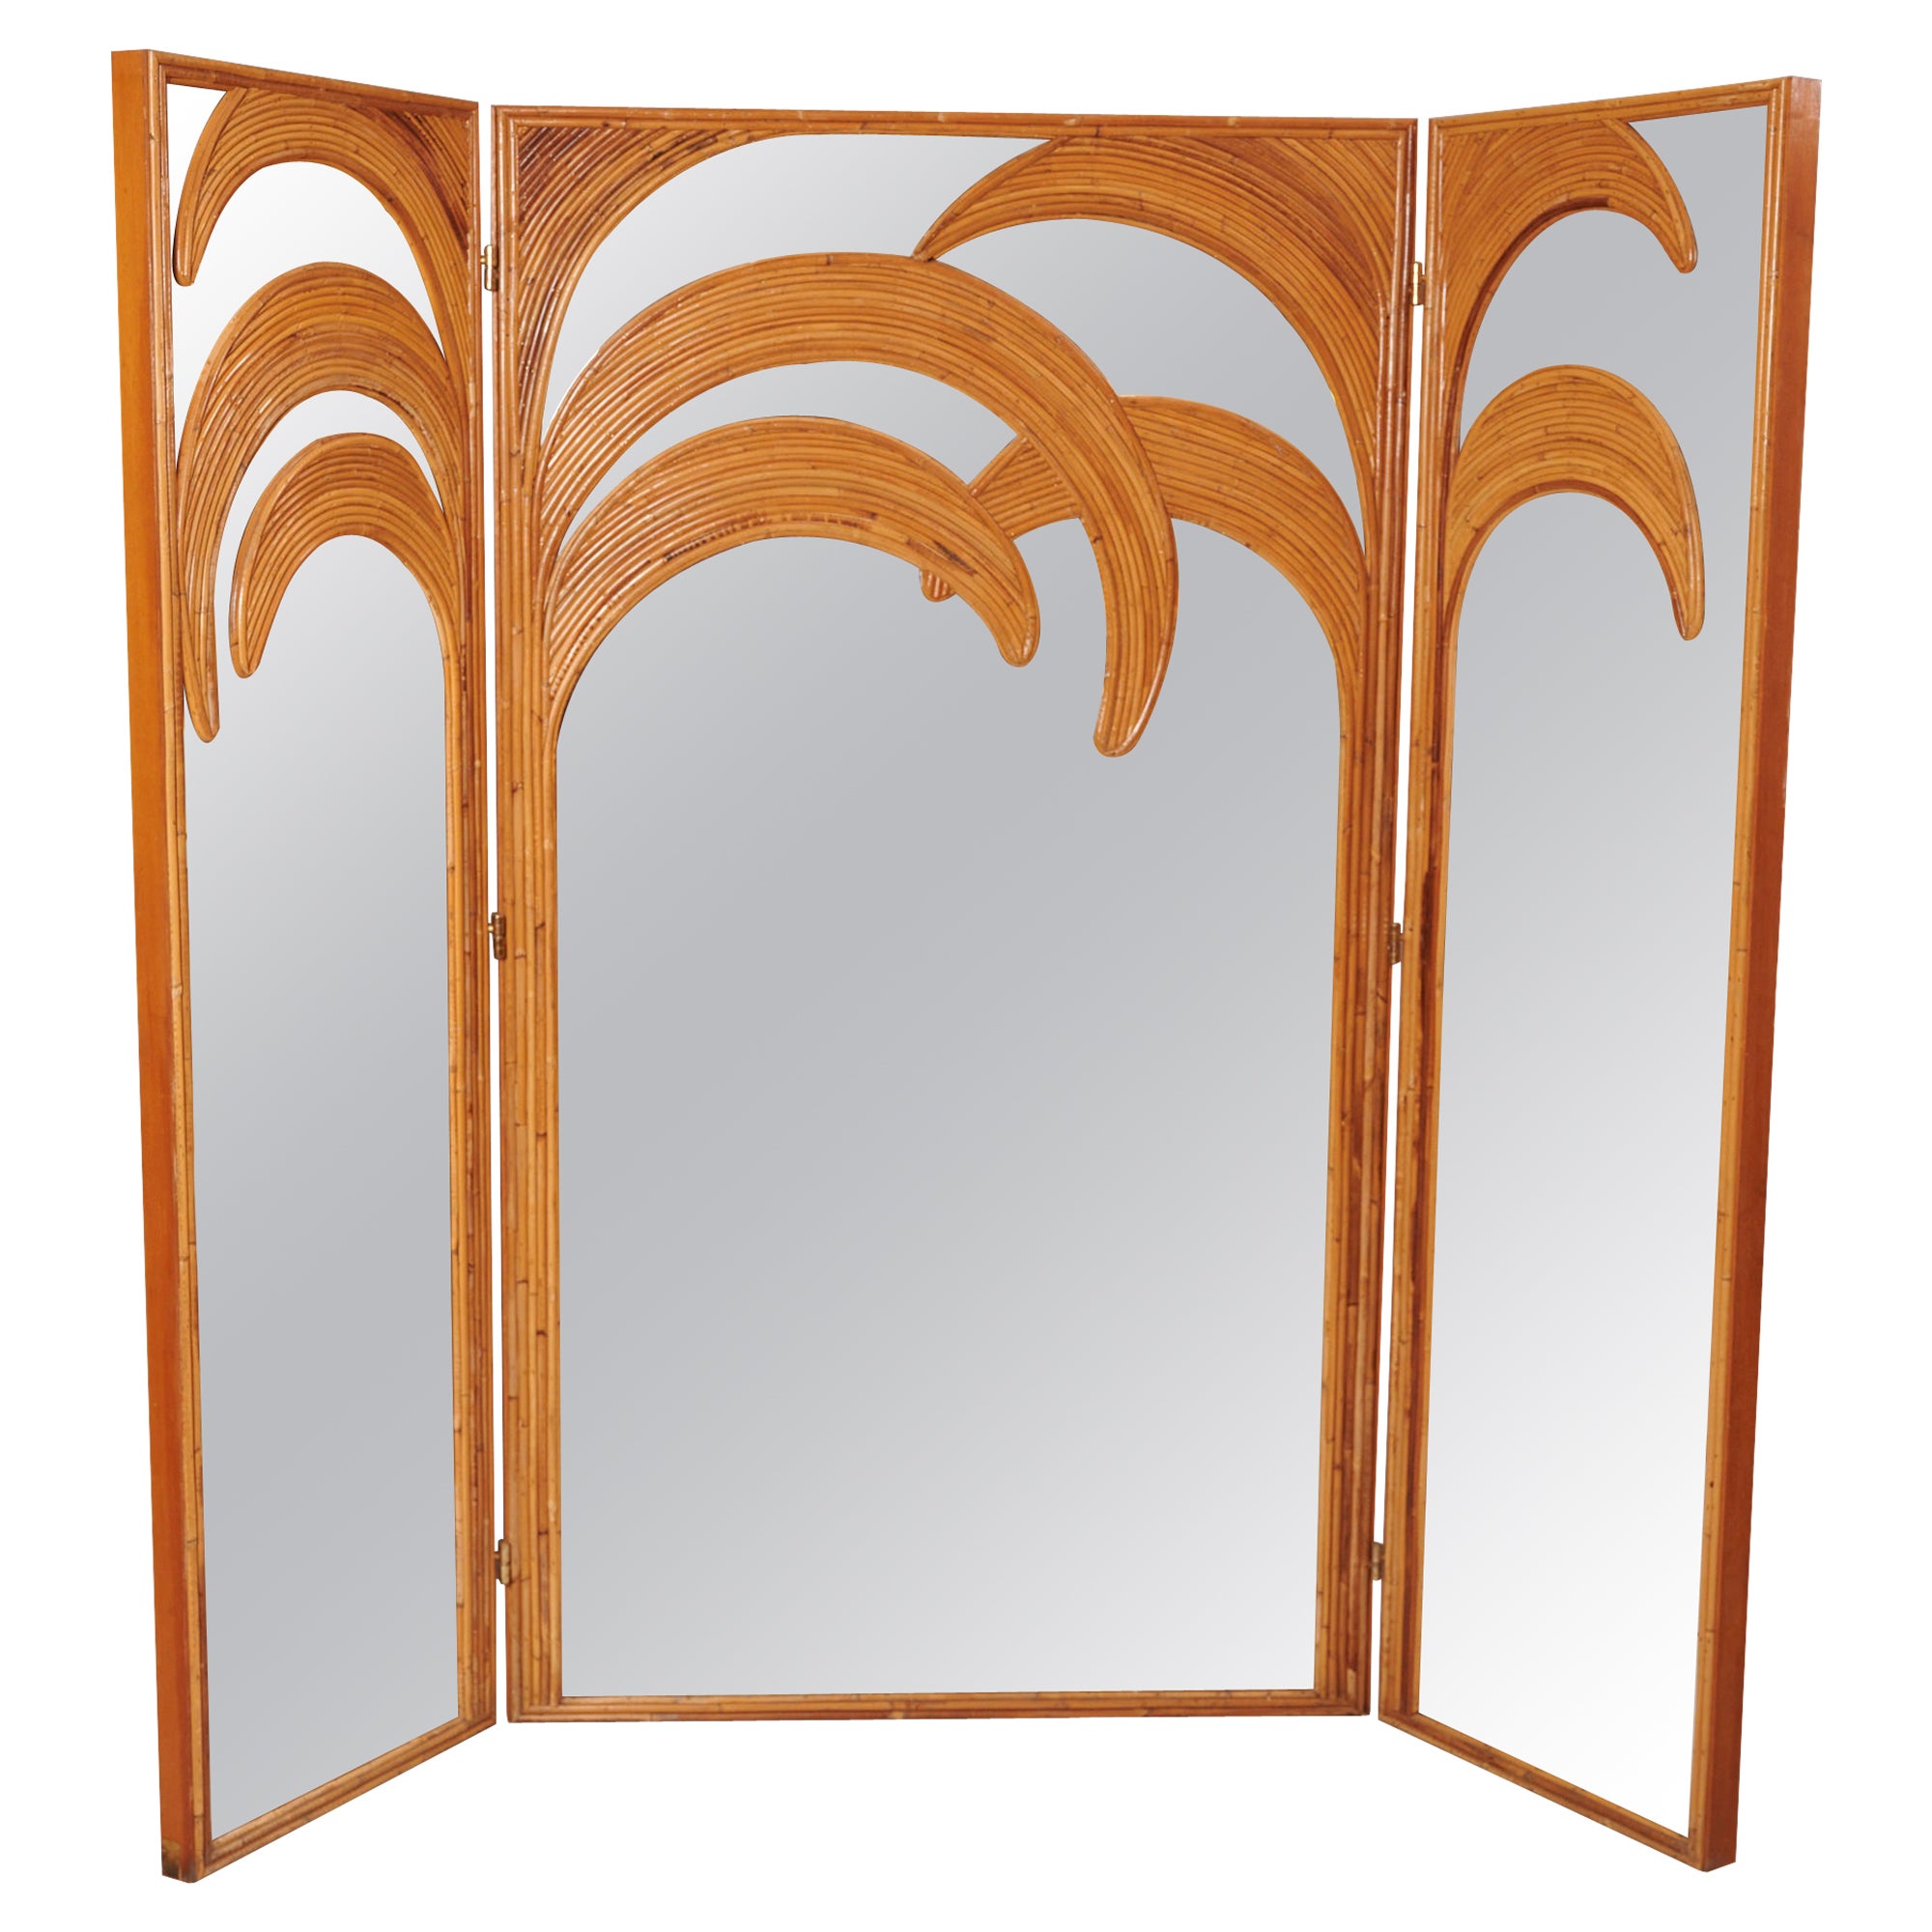 Vivai del Sud Mirrored Screen with Bamboo Palm Trees, C1970